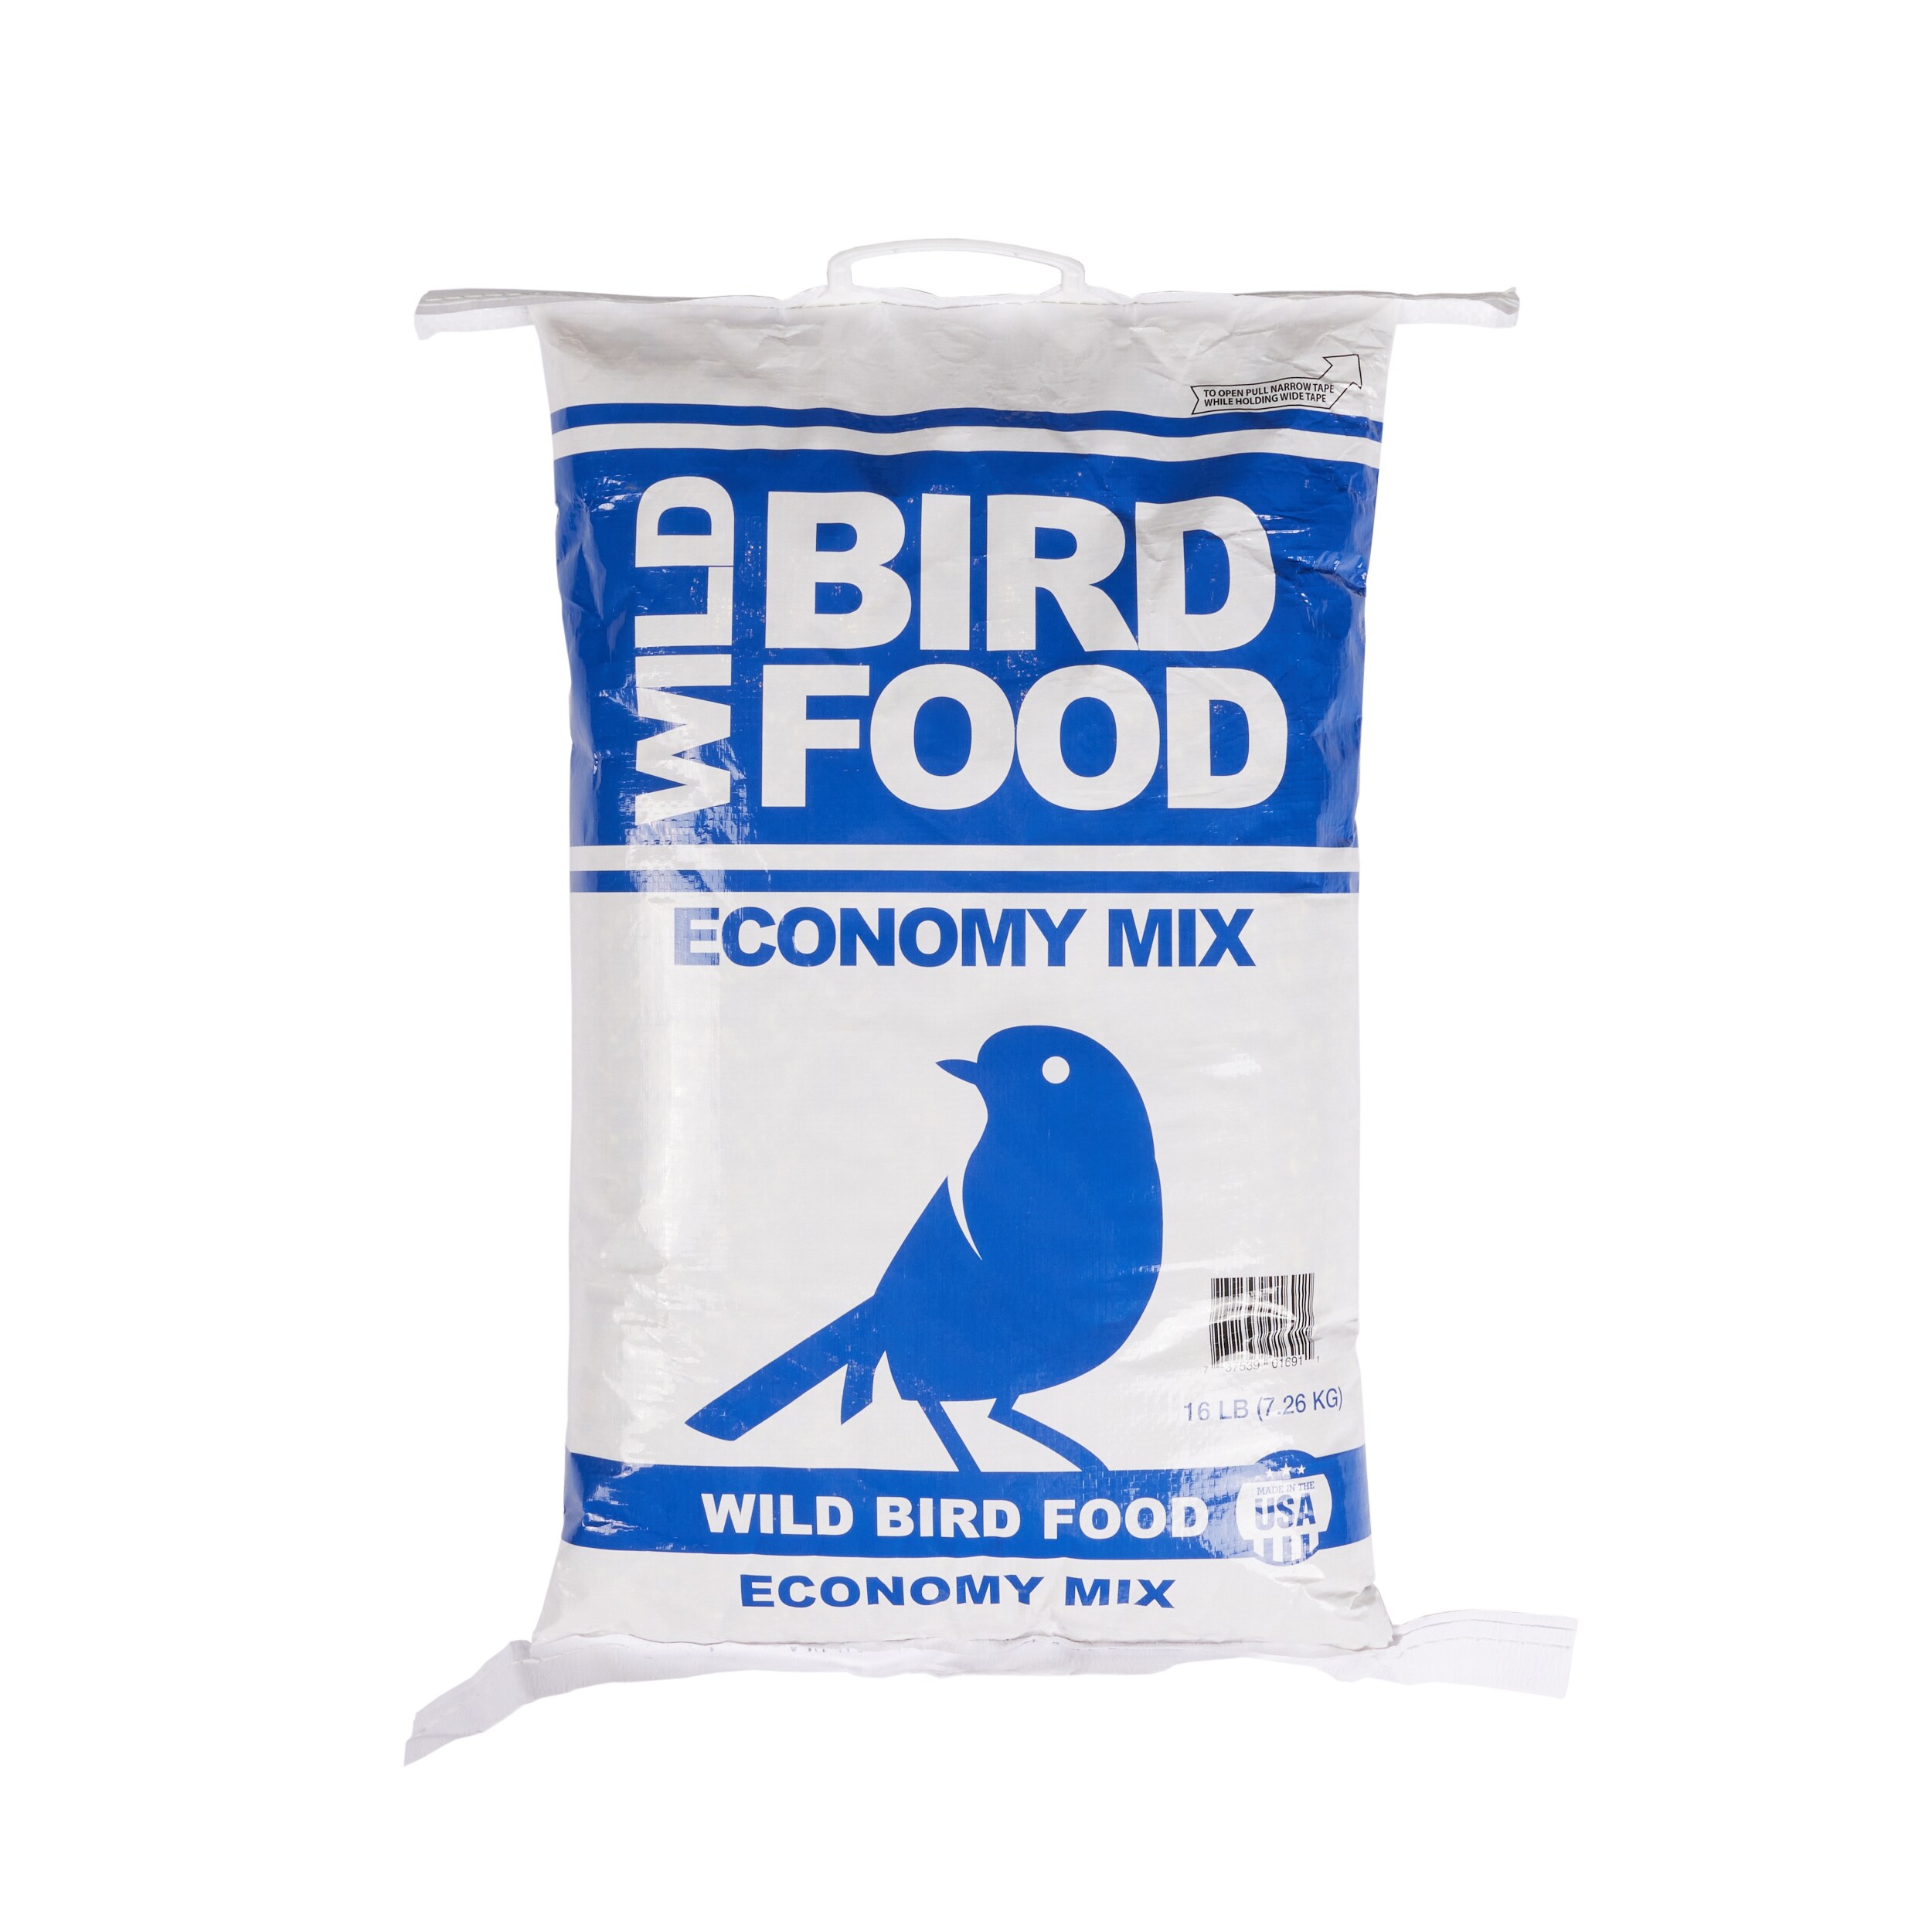 Red River Commodities Hello Birds Welcome Blend Wild Bird Seed 8-lb in the  Bird & Wildlife Food department at